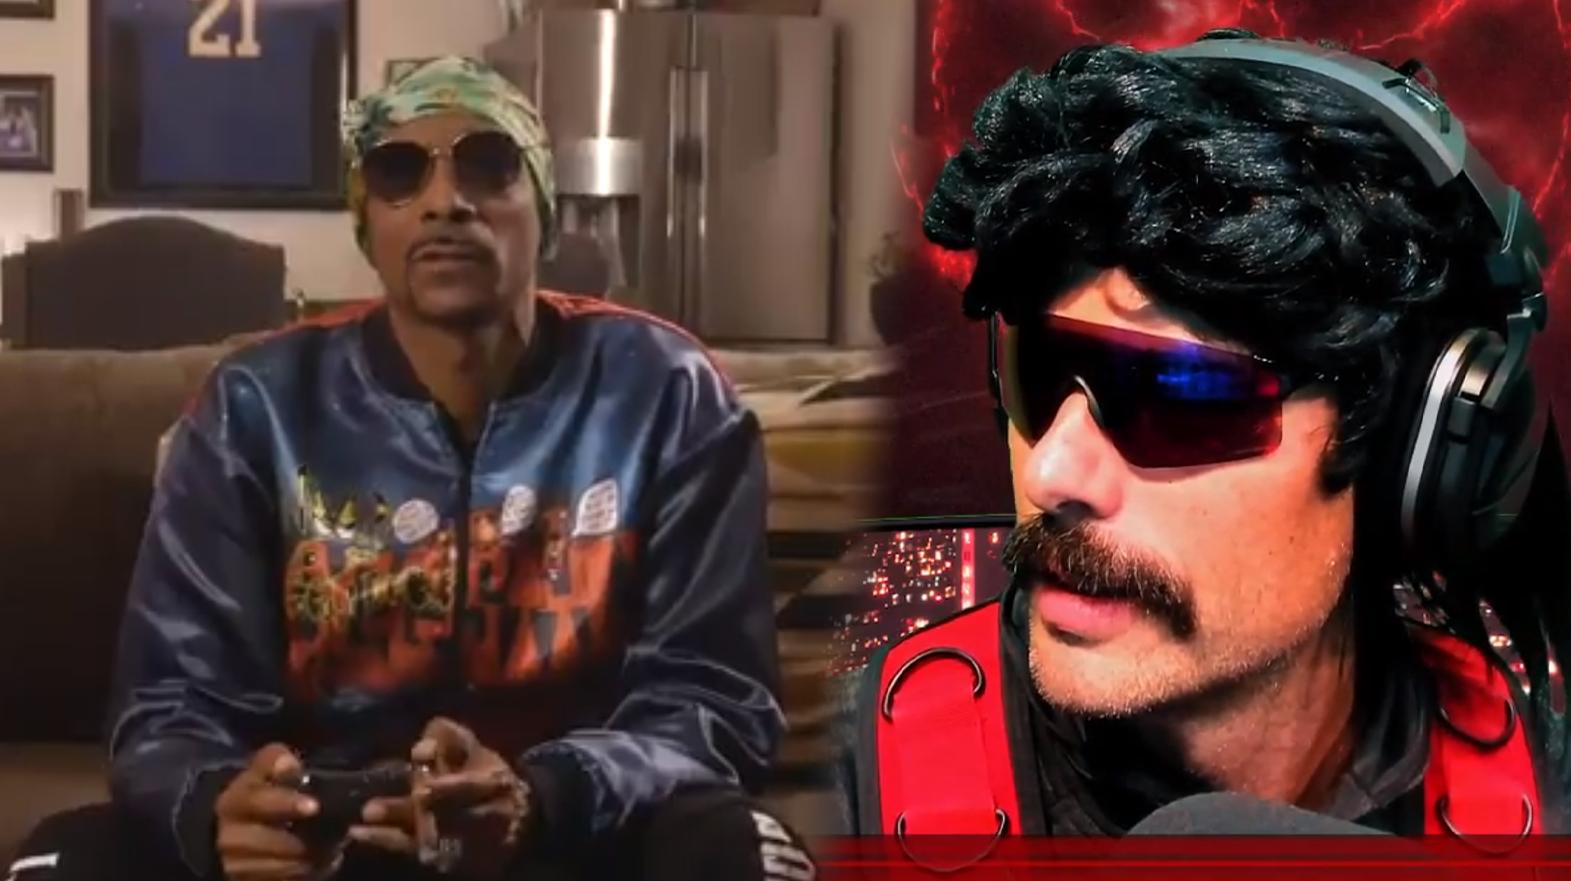 Snoop Dogg playing games with Dr Disrespect